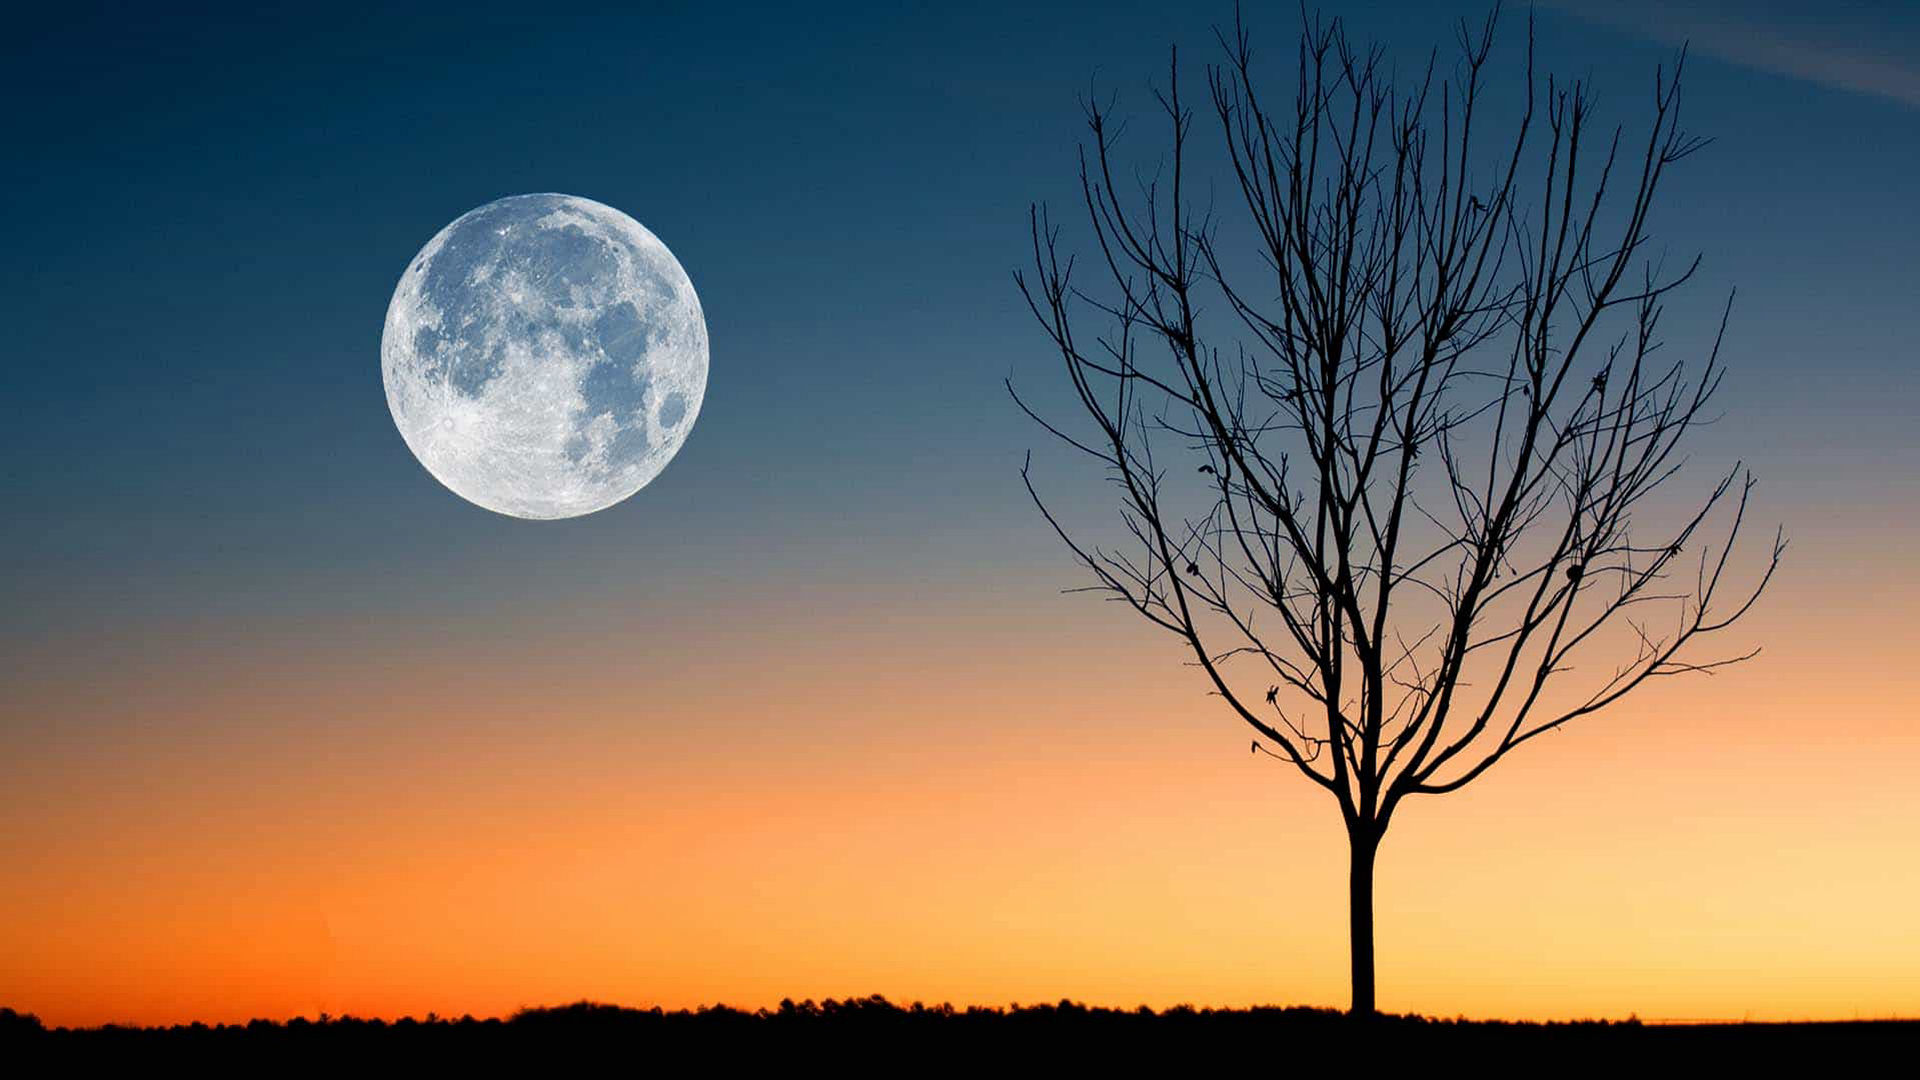 The March Worm Moon — The First Supermoon of 2021?